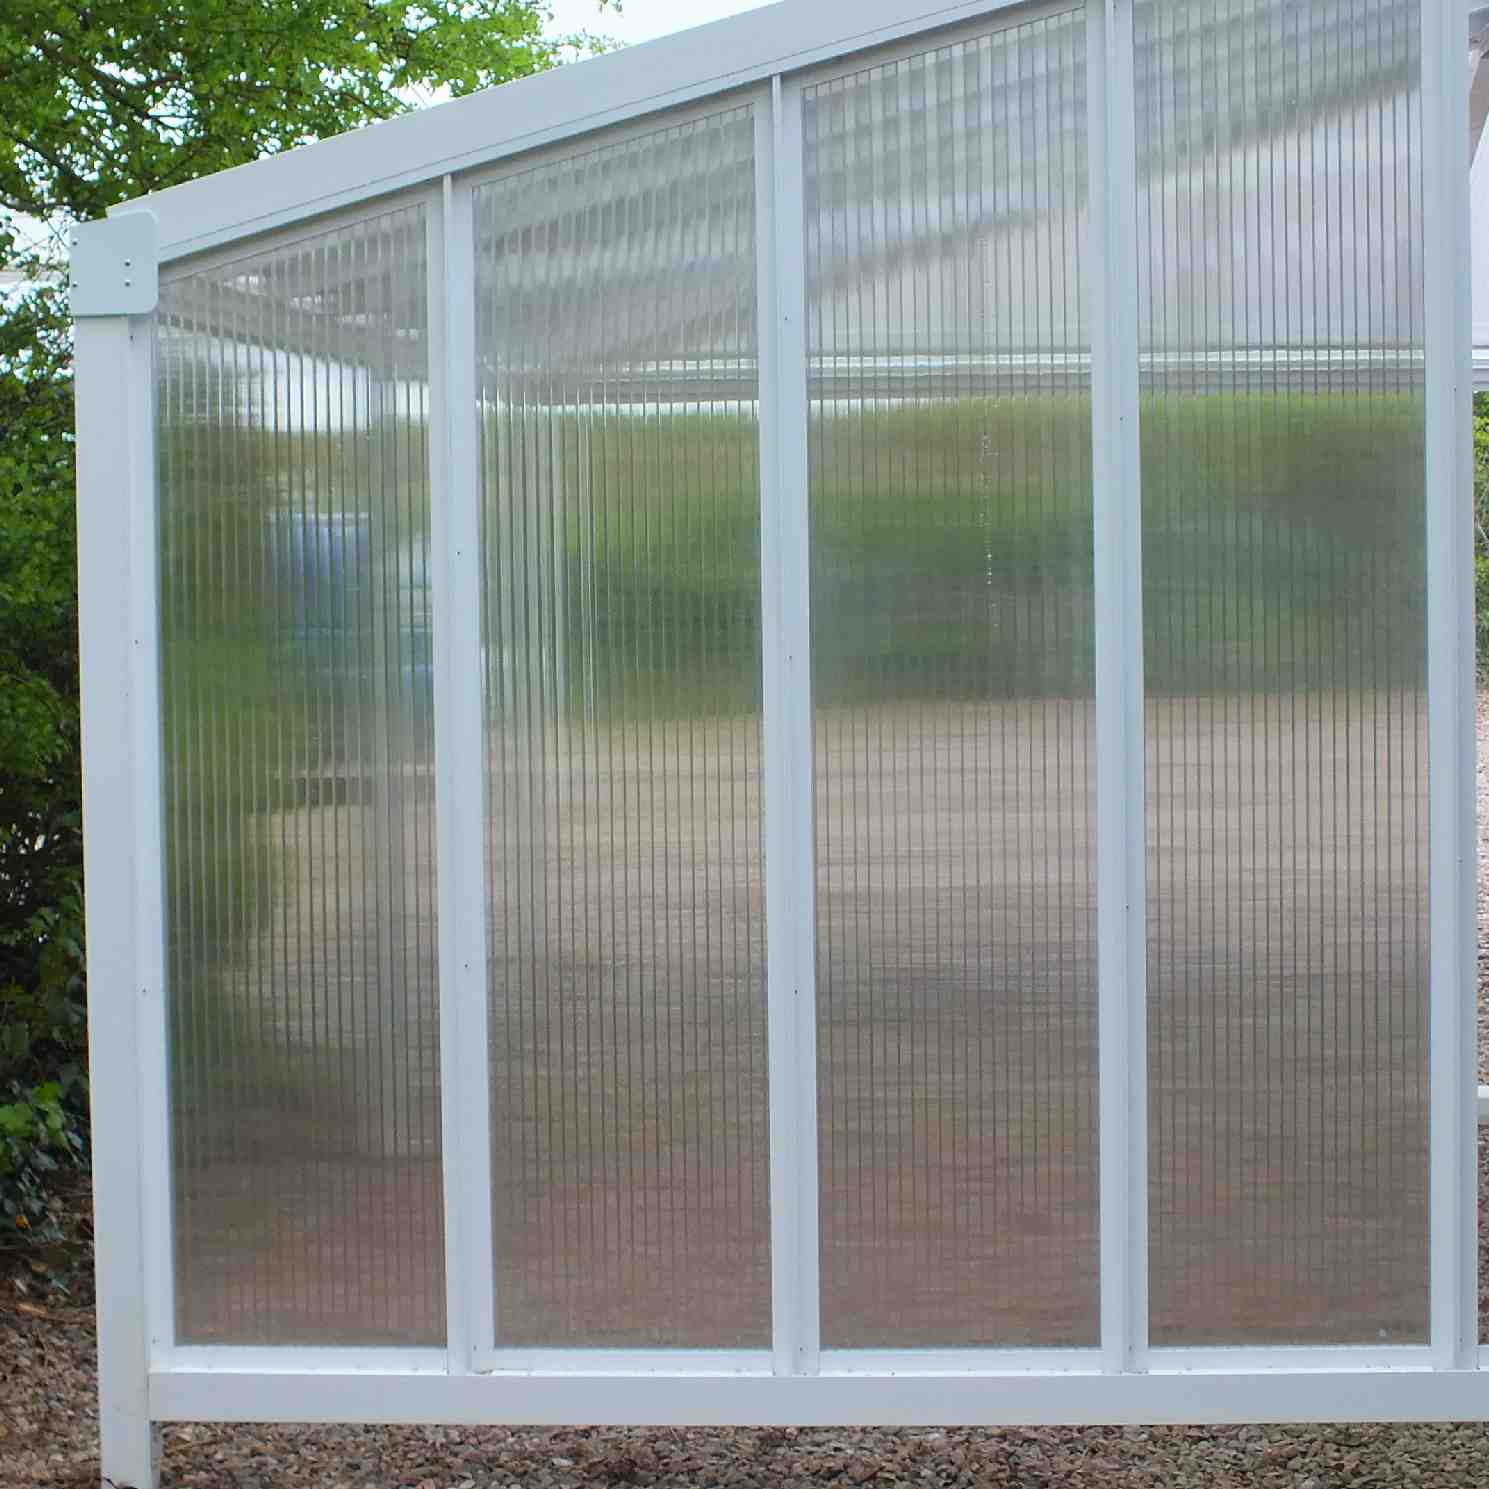 Omega Smart Canopy - FULL Side In-Fill Section for Sides of Canopy, 16mm Polycarbonate In-Fill Panels, White Frame